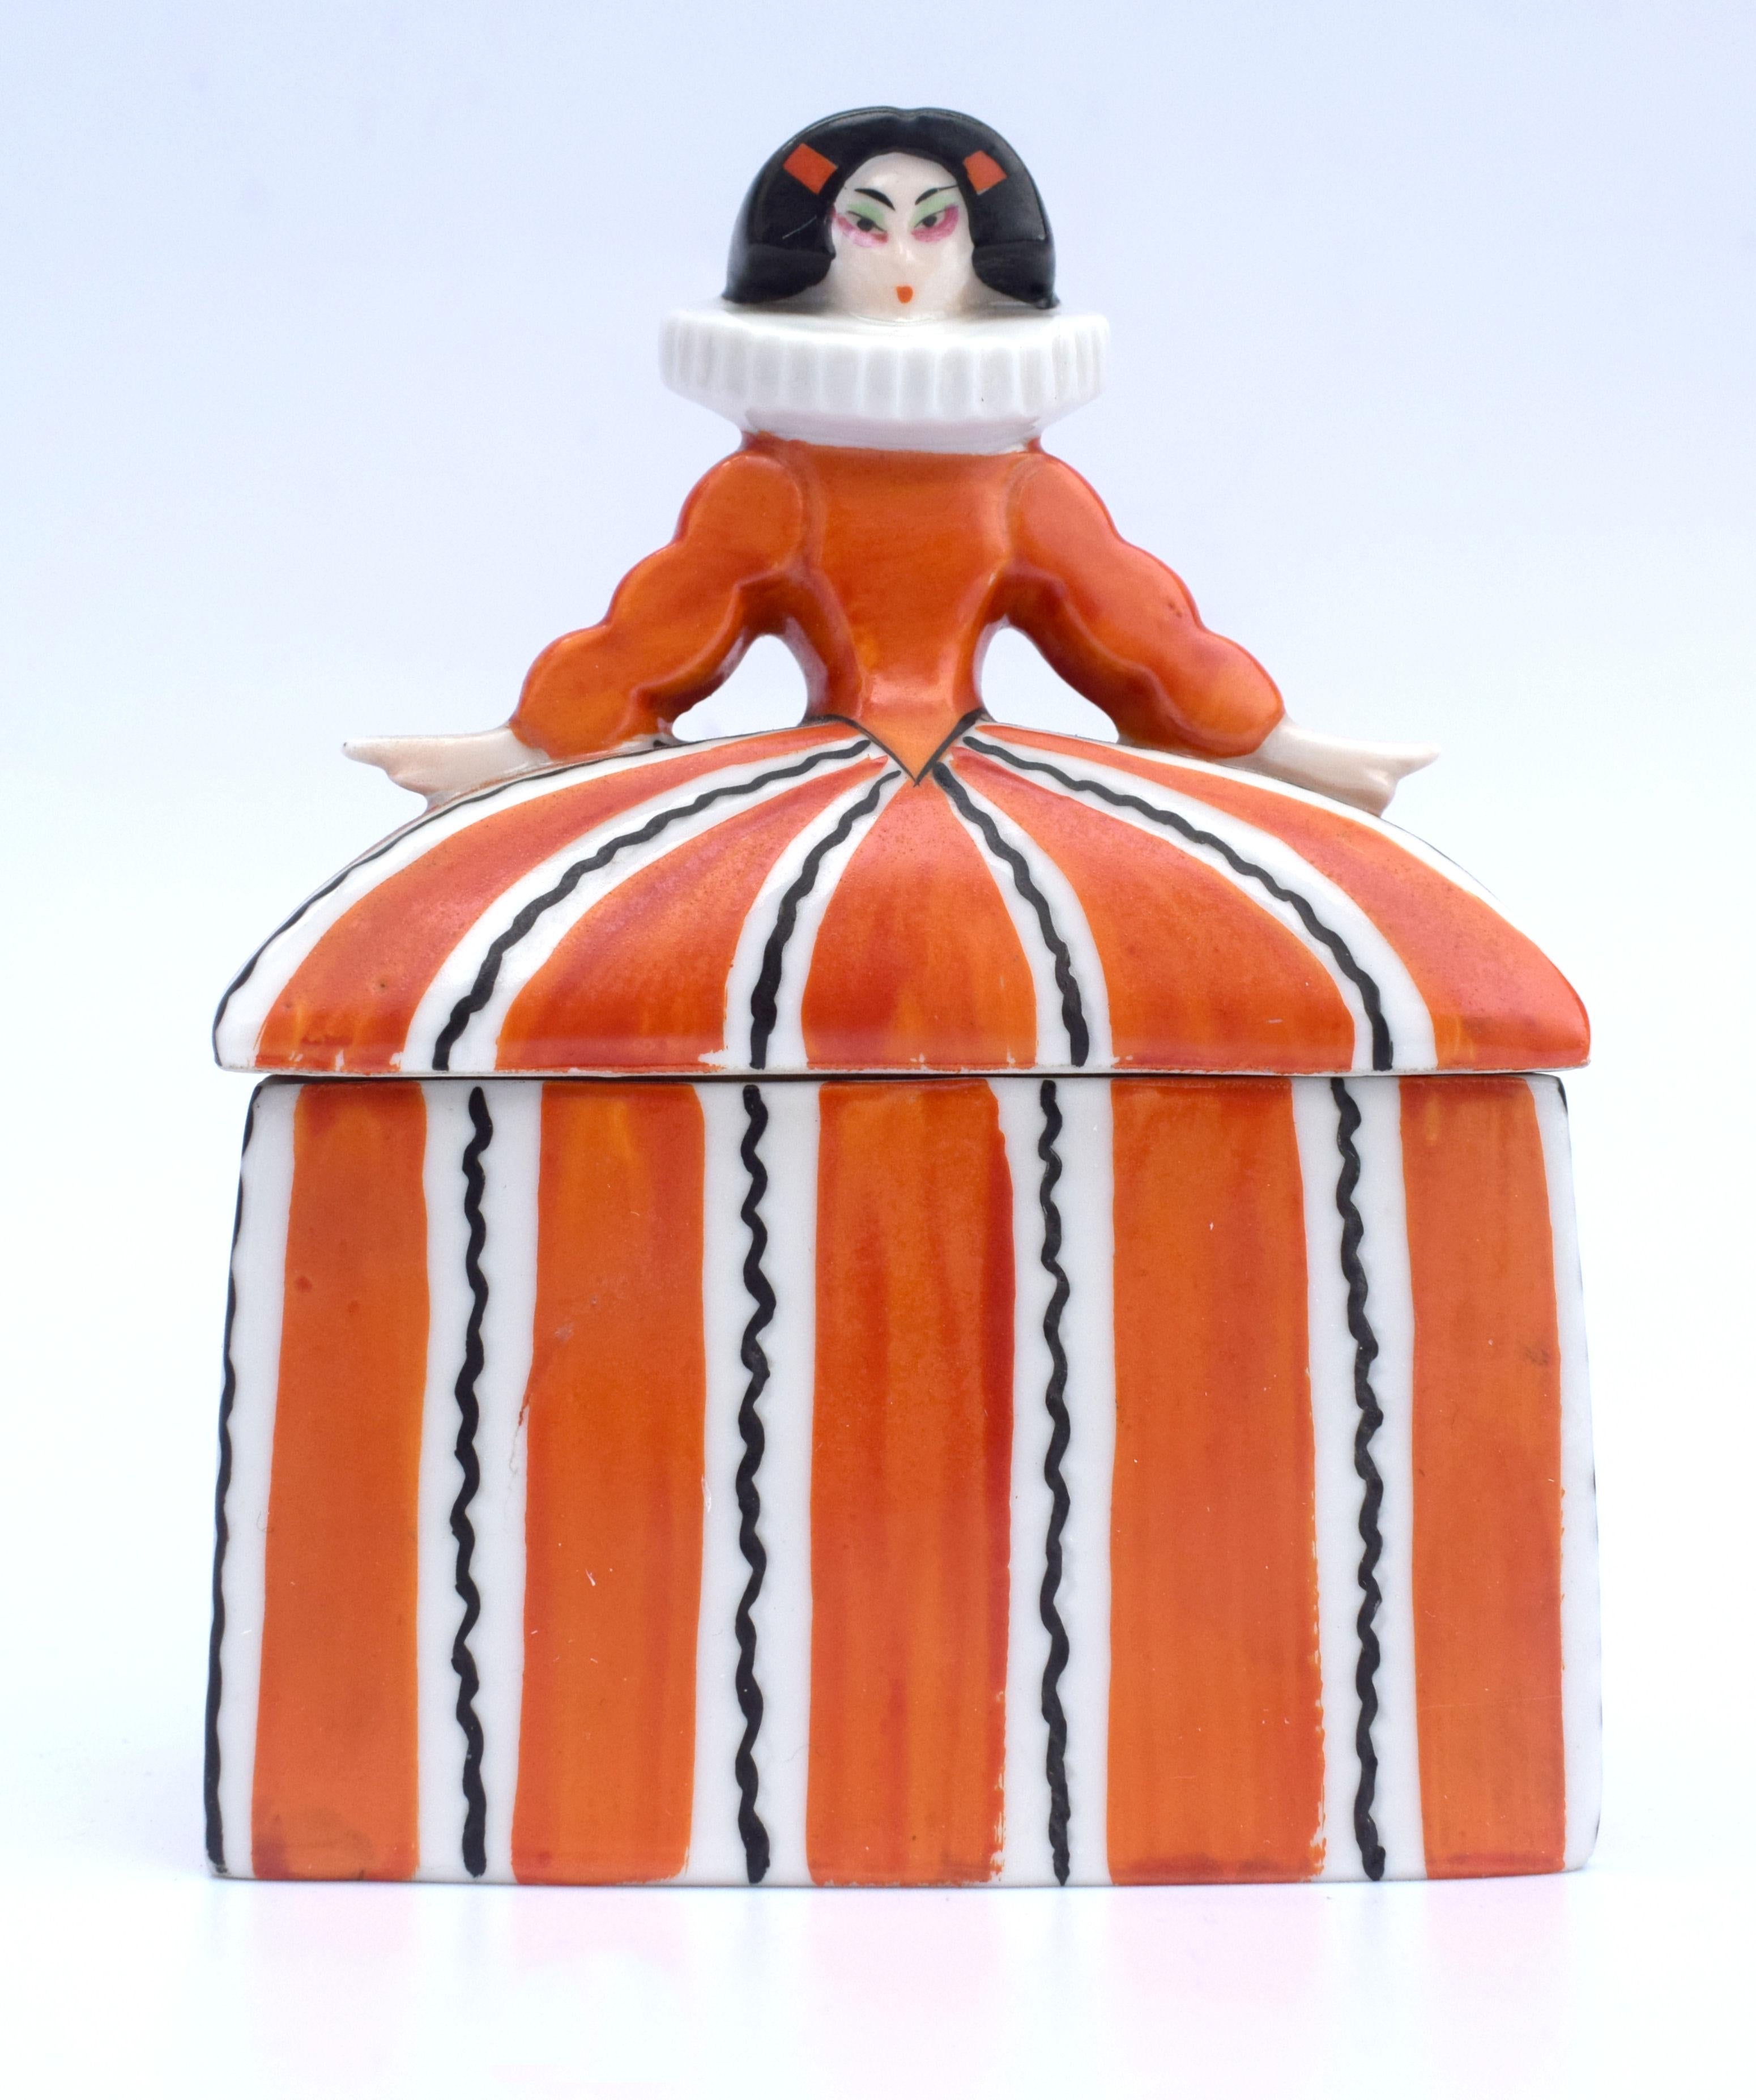 Possibly one of our all time favourite Art Deco powder bowls is this fine porcelain example, dating to the 1930s and originating from Germany made by Wallendorf Thuringia company. This highly stylized lady is painted in vivid orange and black on the